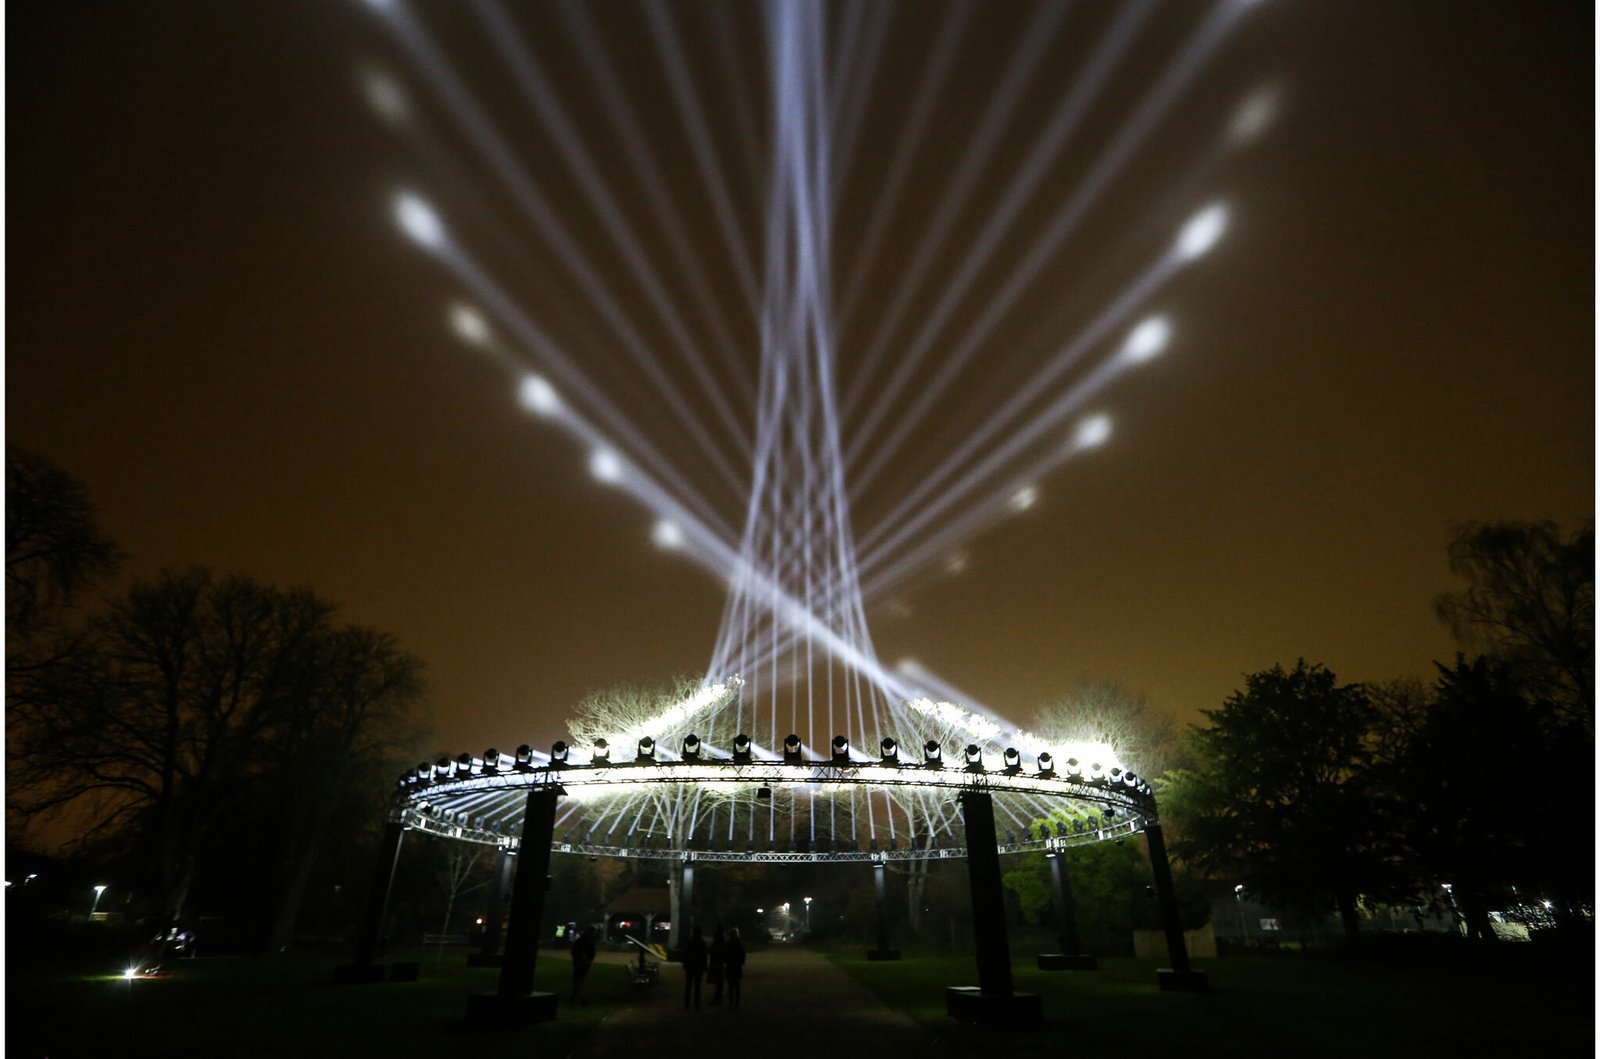 Waltham Forest is being bathed in light tonight and it looks incredible